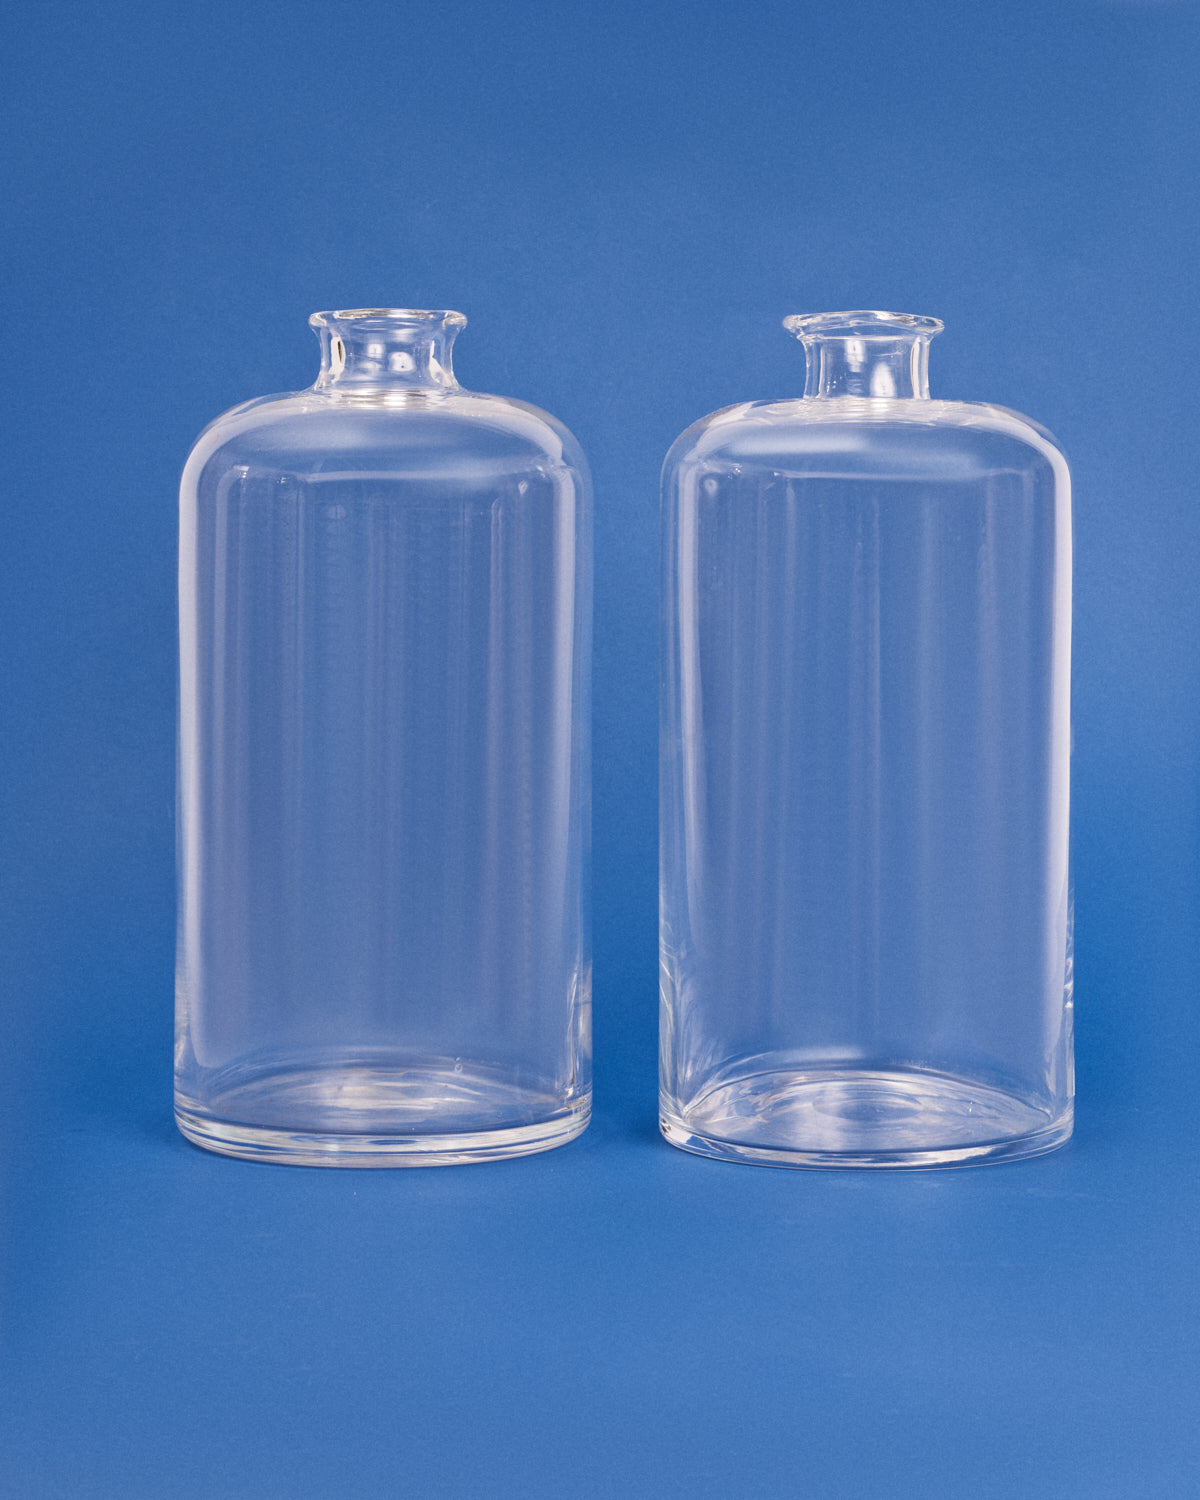 Pair of tall glass vases